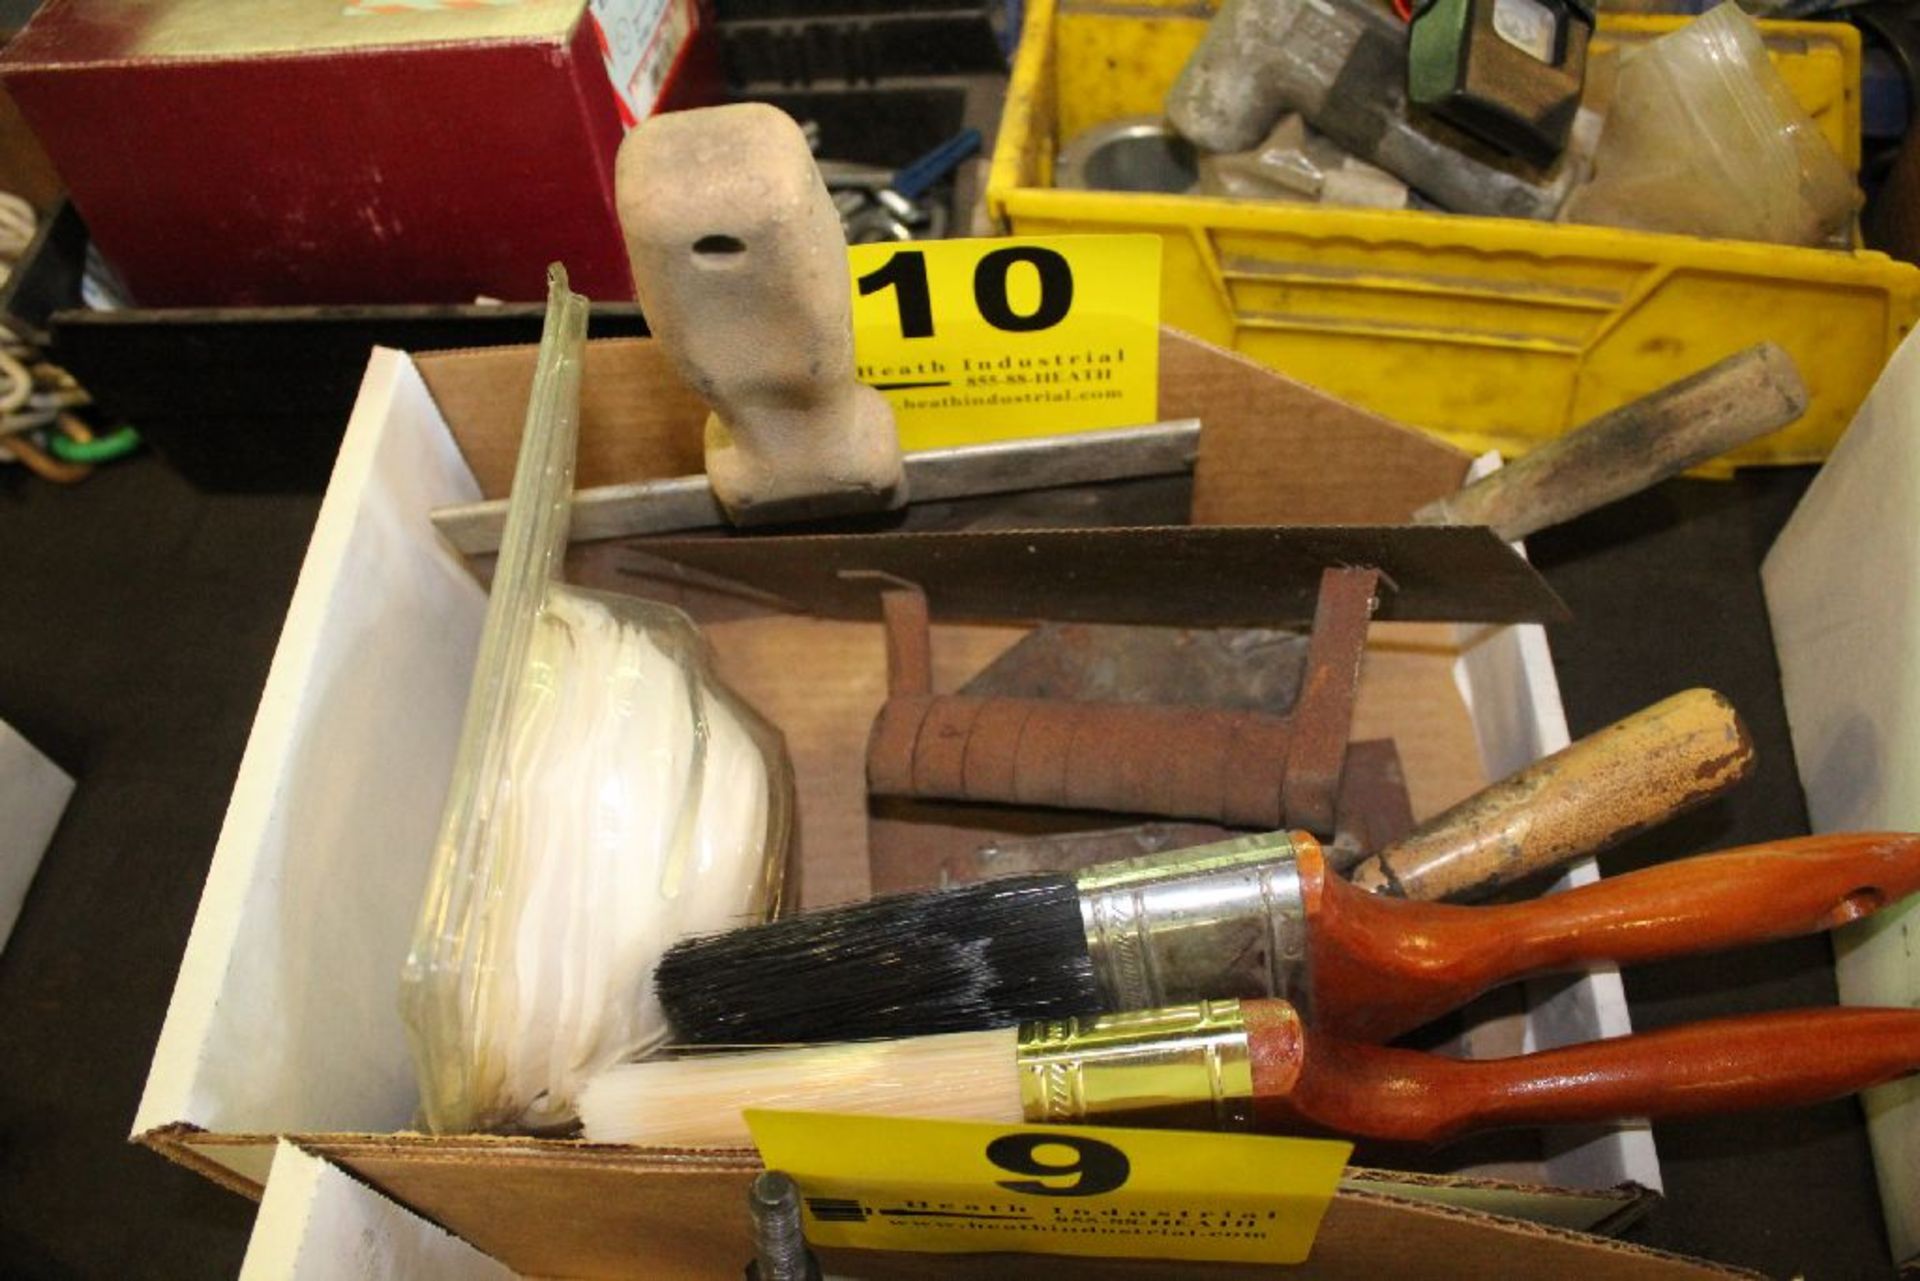 BRUSHES AND DRYWALL TOOLS IN BOX